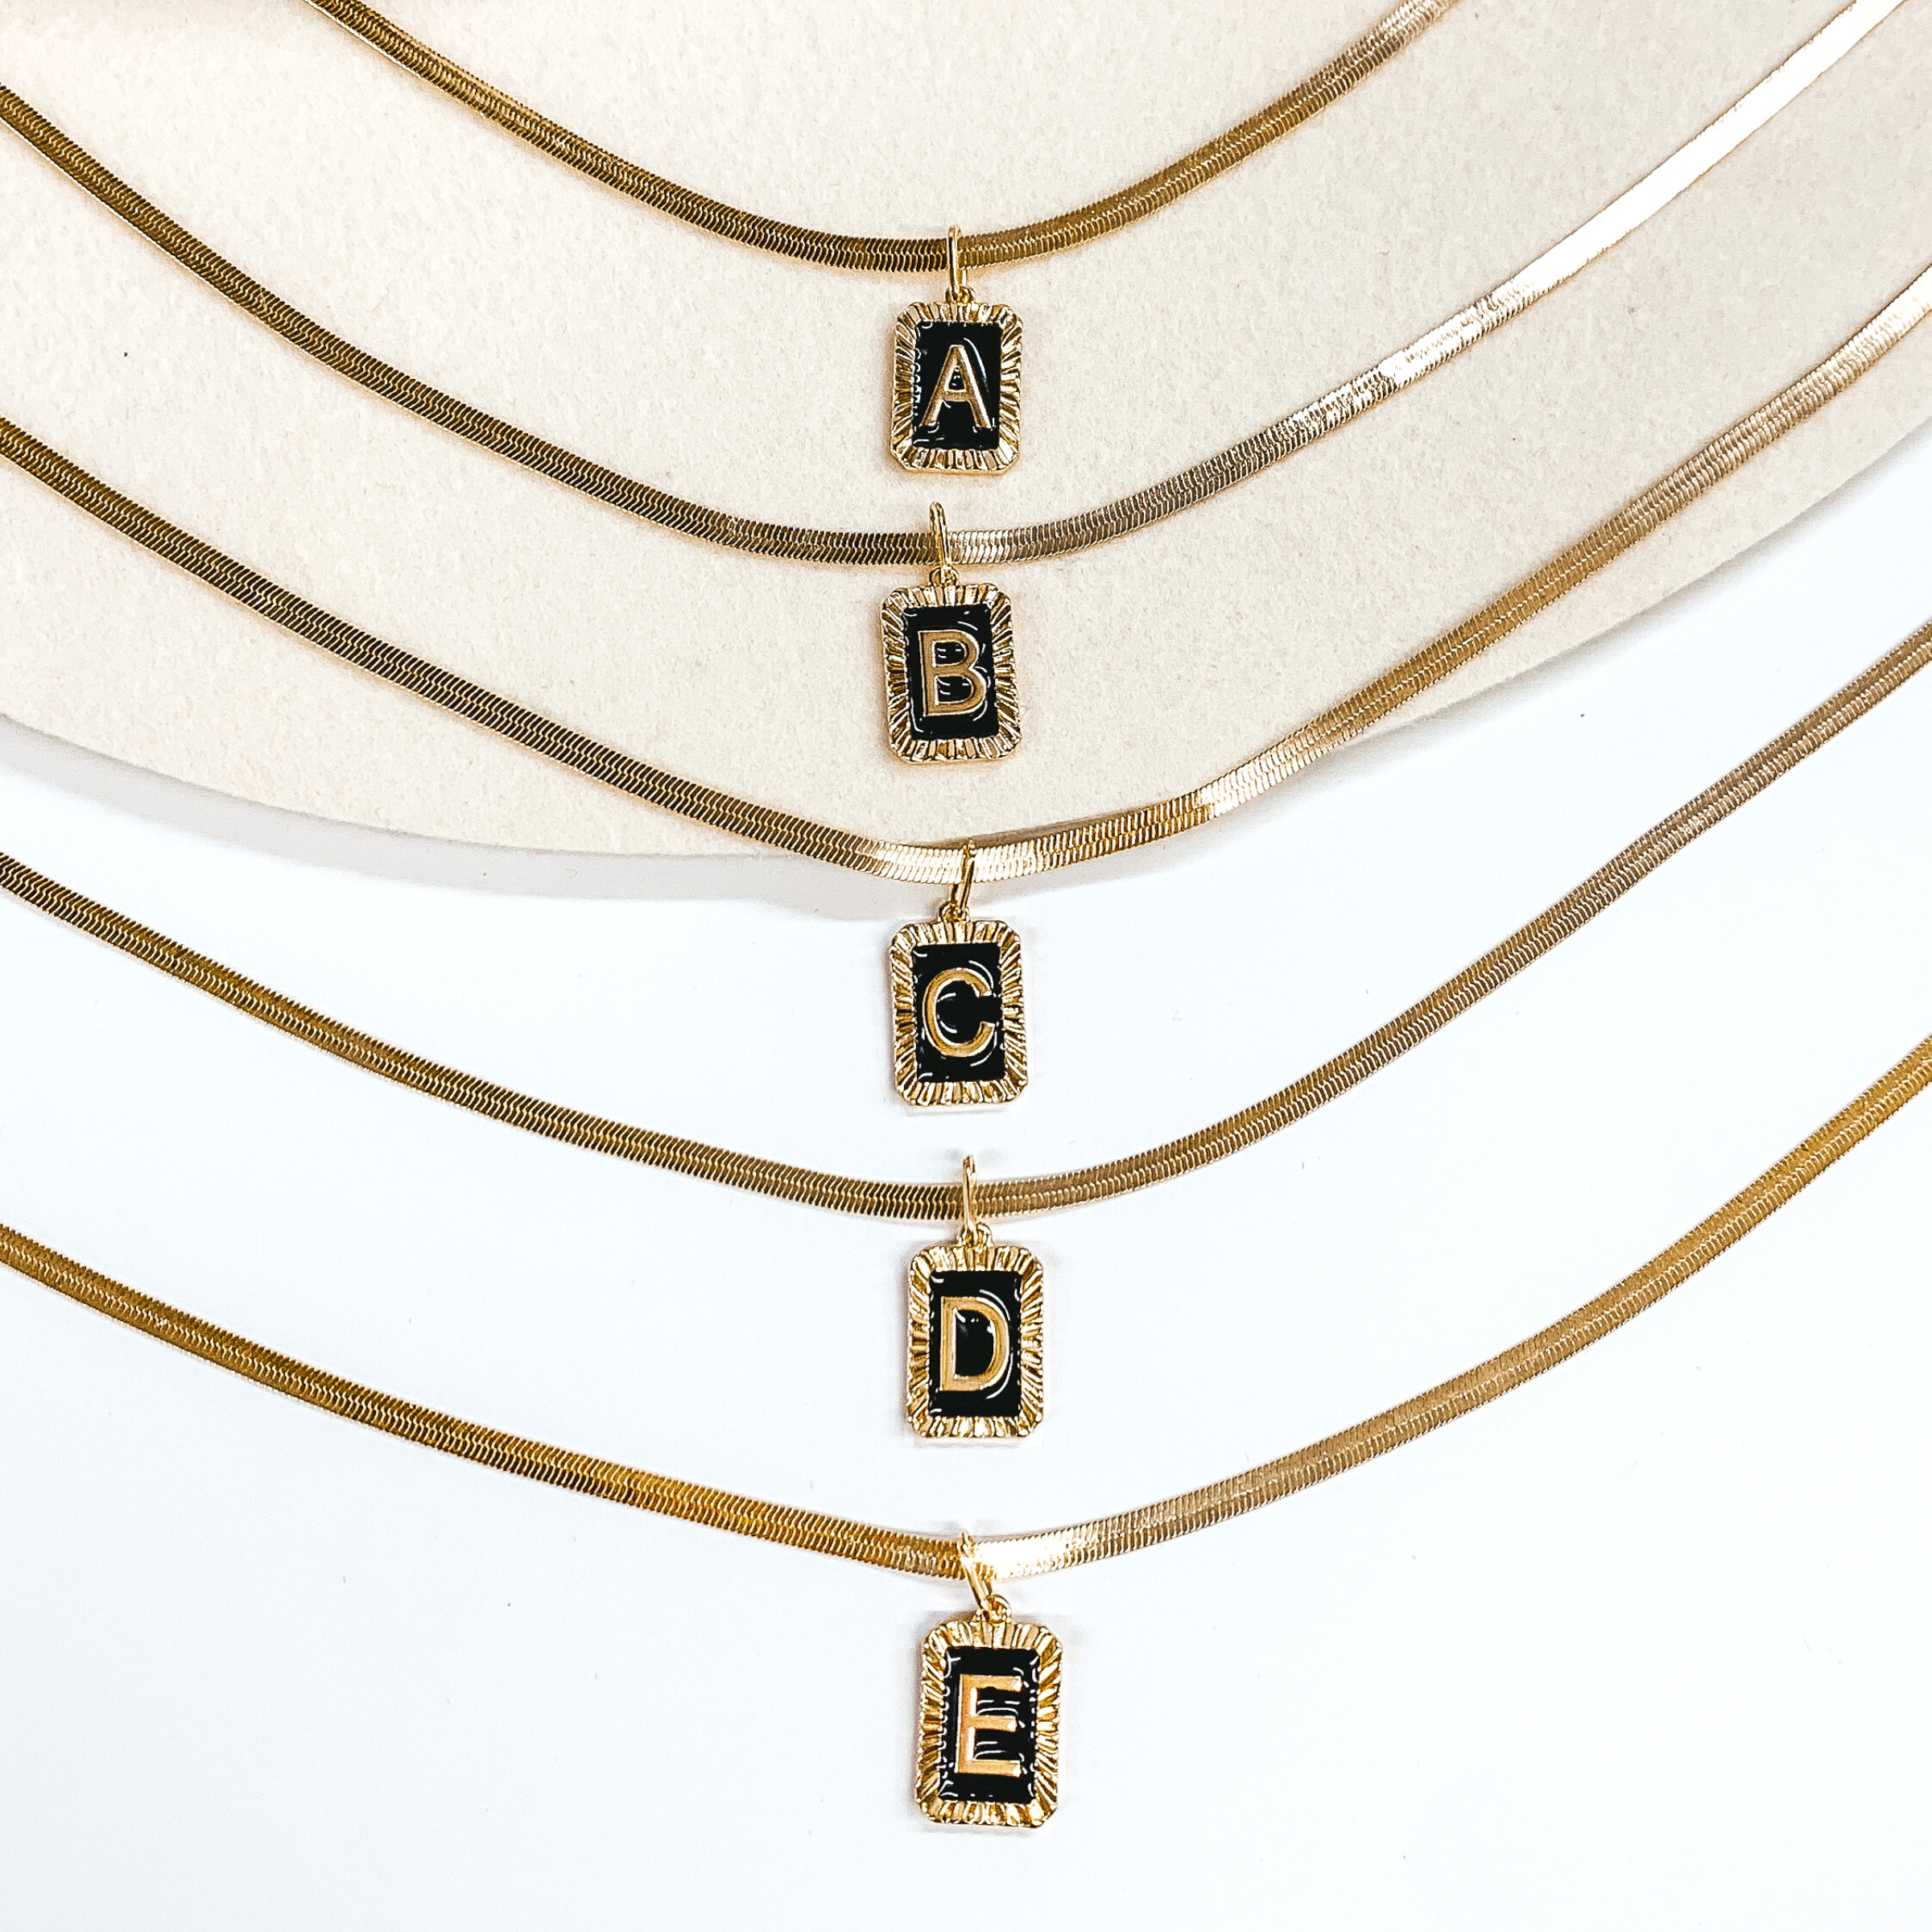 Gold Tone Herringbone Chain Necklace with Rectangle Initial Pendant in Black - Giddy Up Glamour Boutique